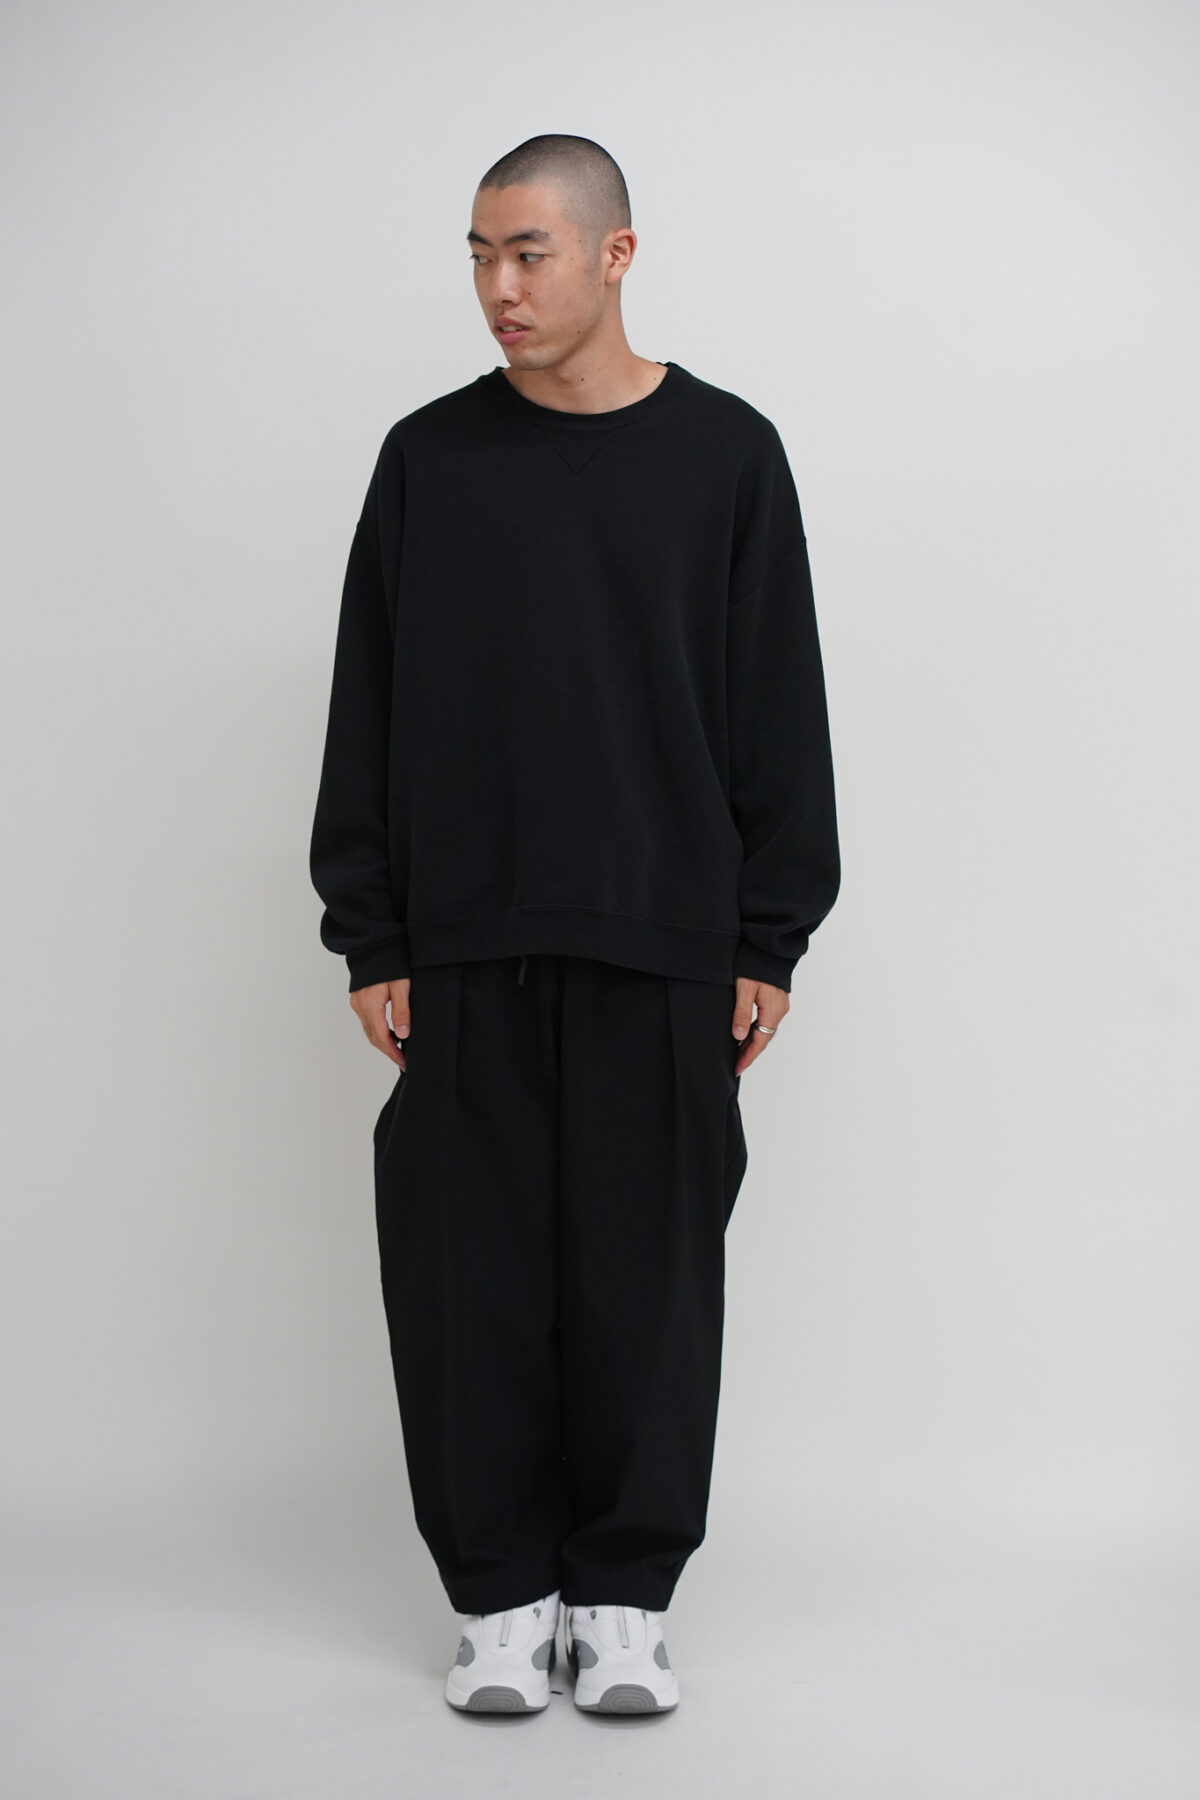 UNTRACE BASIC TAPERED SWEAT TRACK PANTS - その他